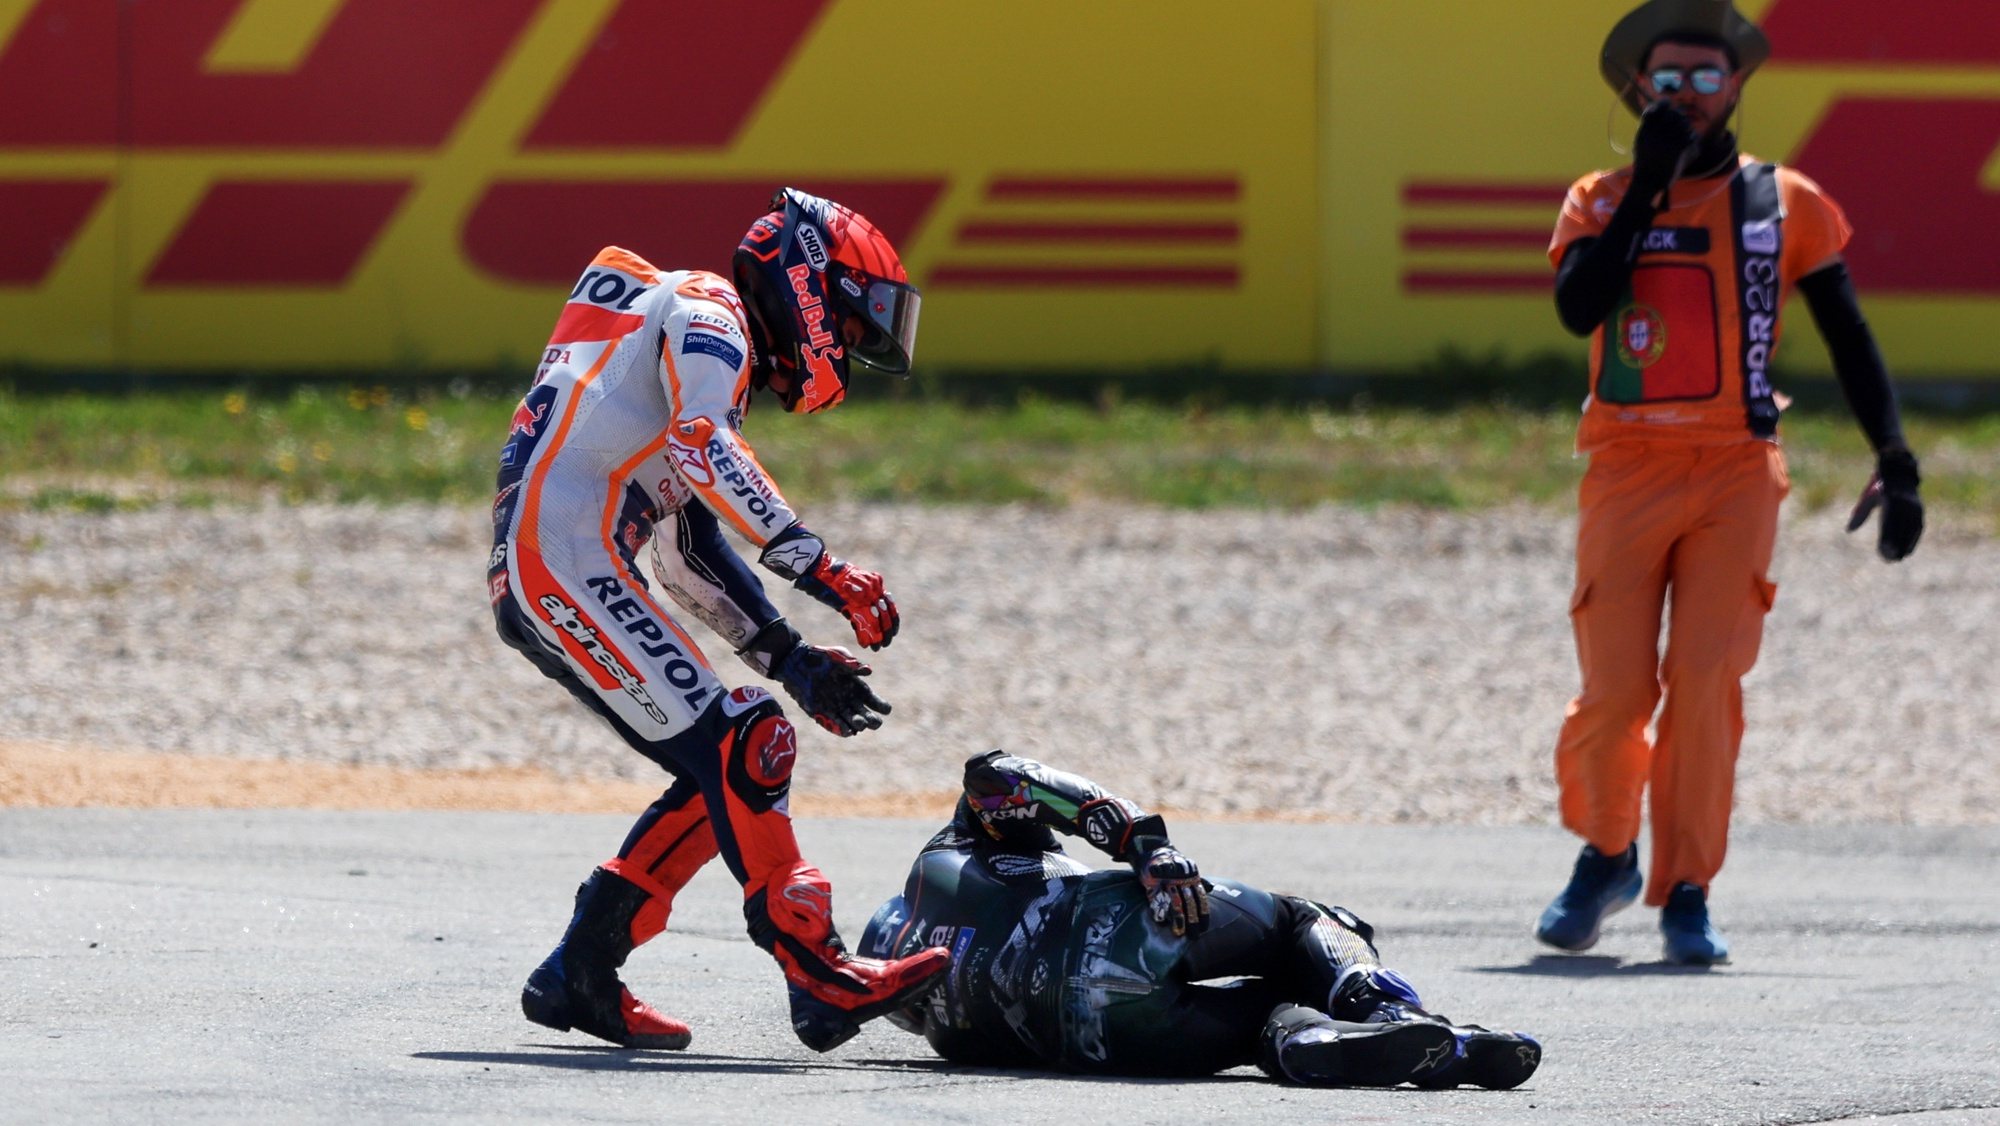 Spanish MotoGP rider Marc Marquez (L) of Repsol Honda Team tries to help Portuguese MotoGP rider Miguel Oliveira of CryptoDATA RNF MotoGP Team after a crash during the MotoGP race at the Motorcycling Grand Prix of Portugal at Algarve International race track, Portimao, south of Portugal, 26 March 2023. NUNO VEIGA/LUSA